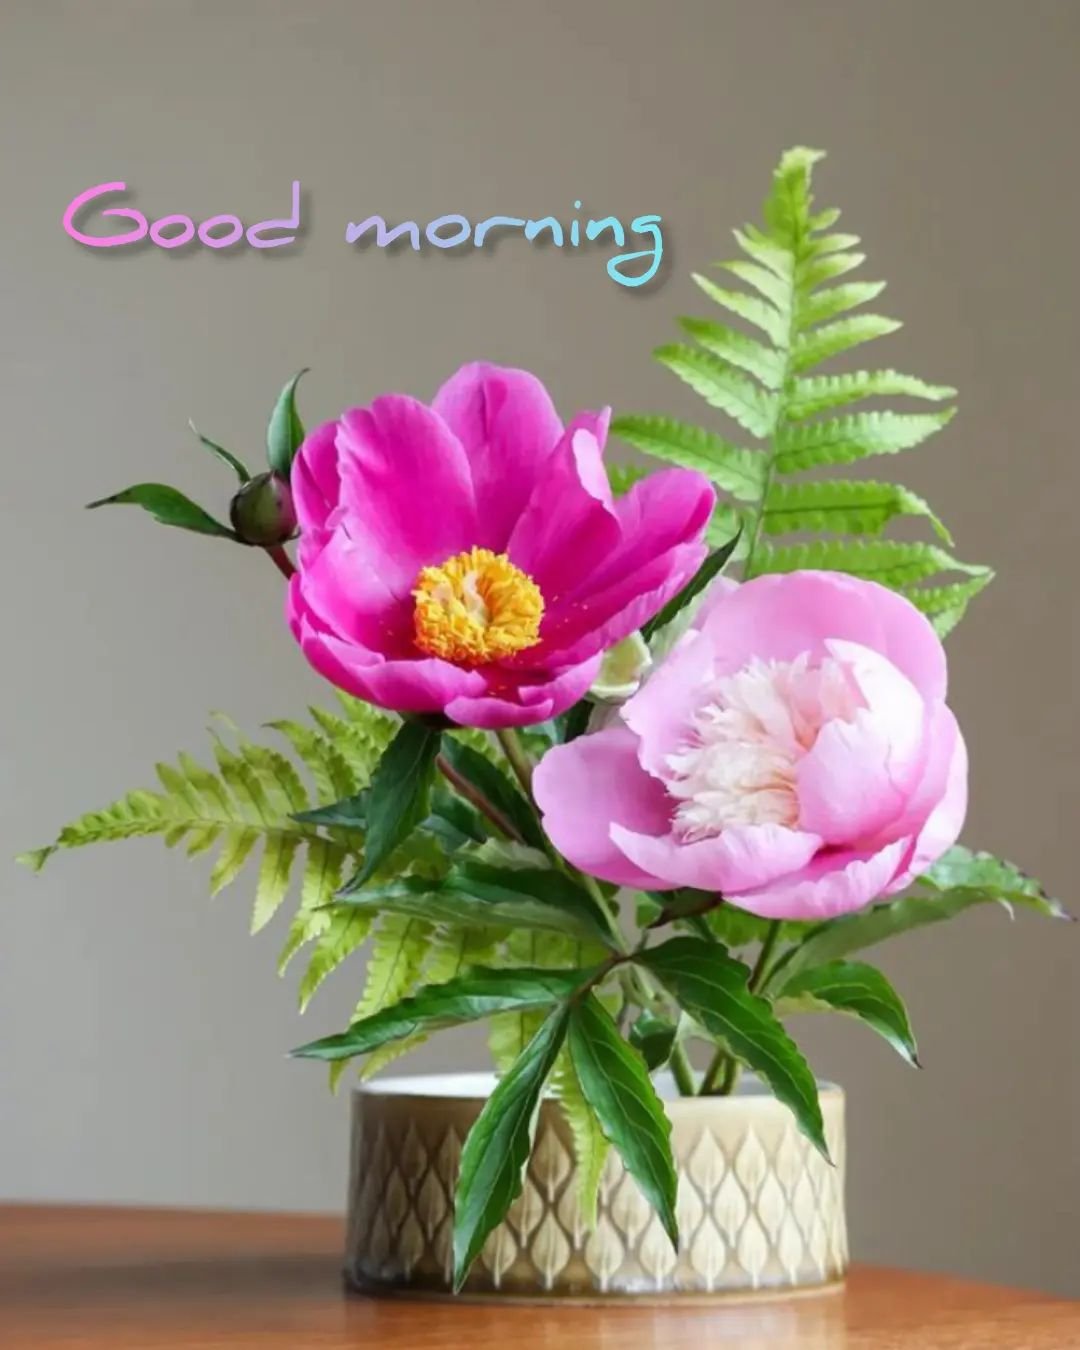 New Beautiful Good Morning Images